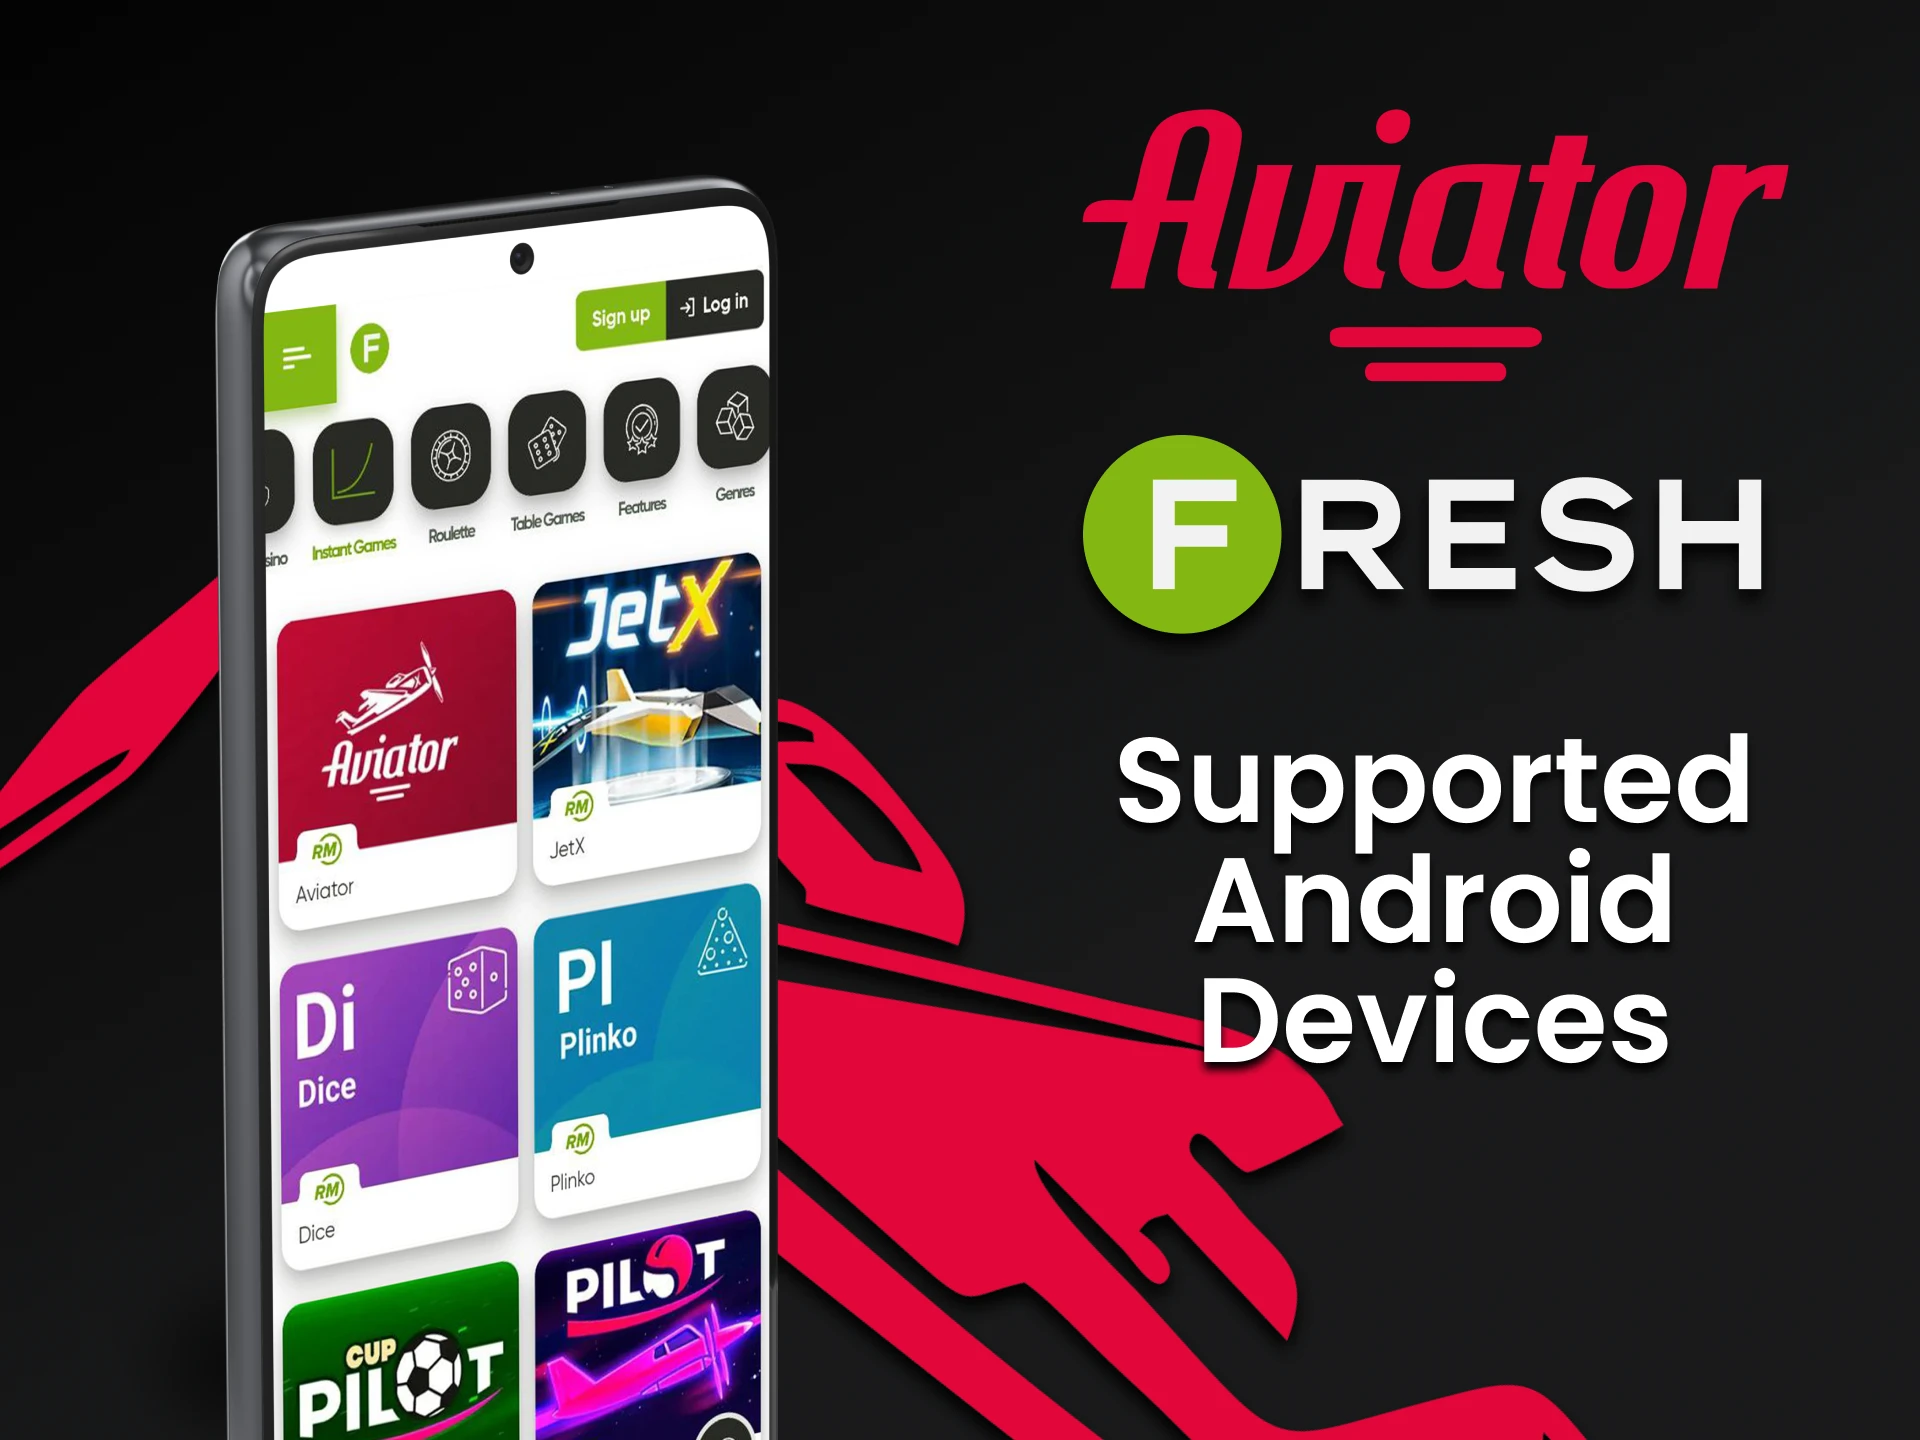 Choose Android devices to play Aviator in the Fresh Casino app.